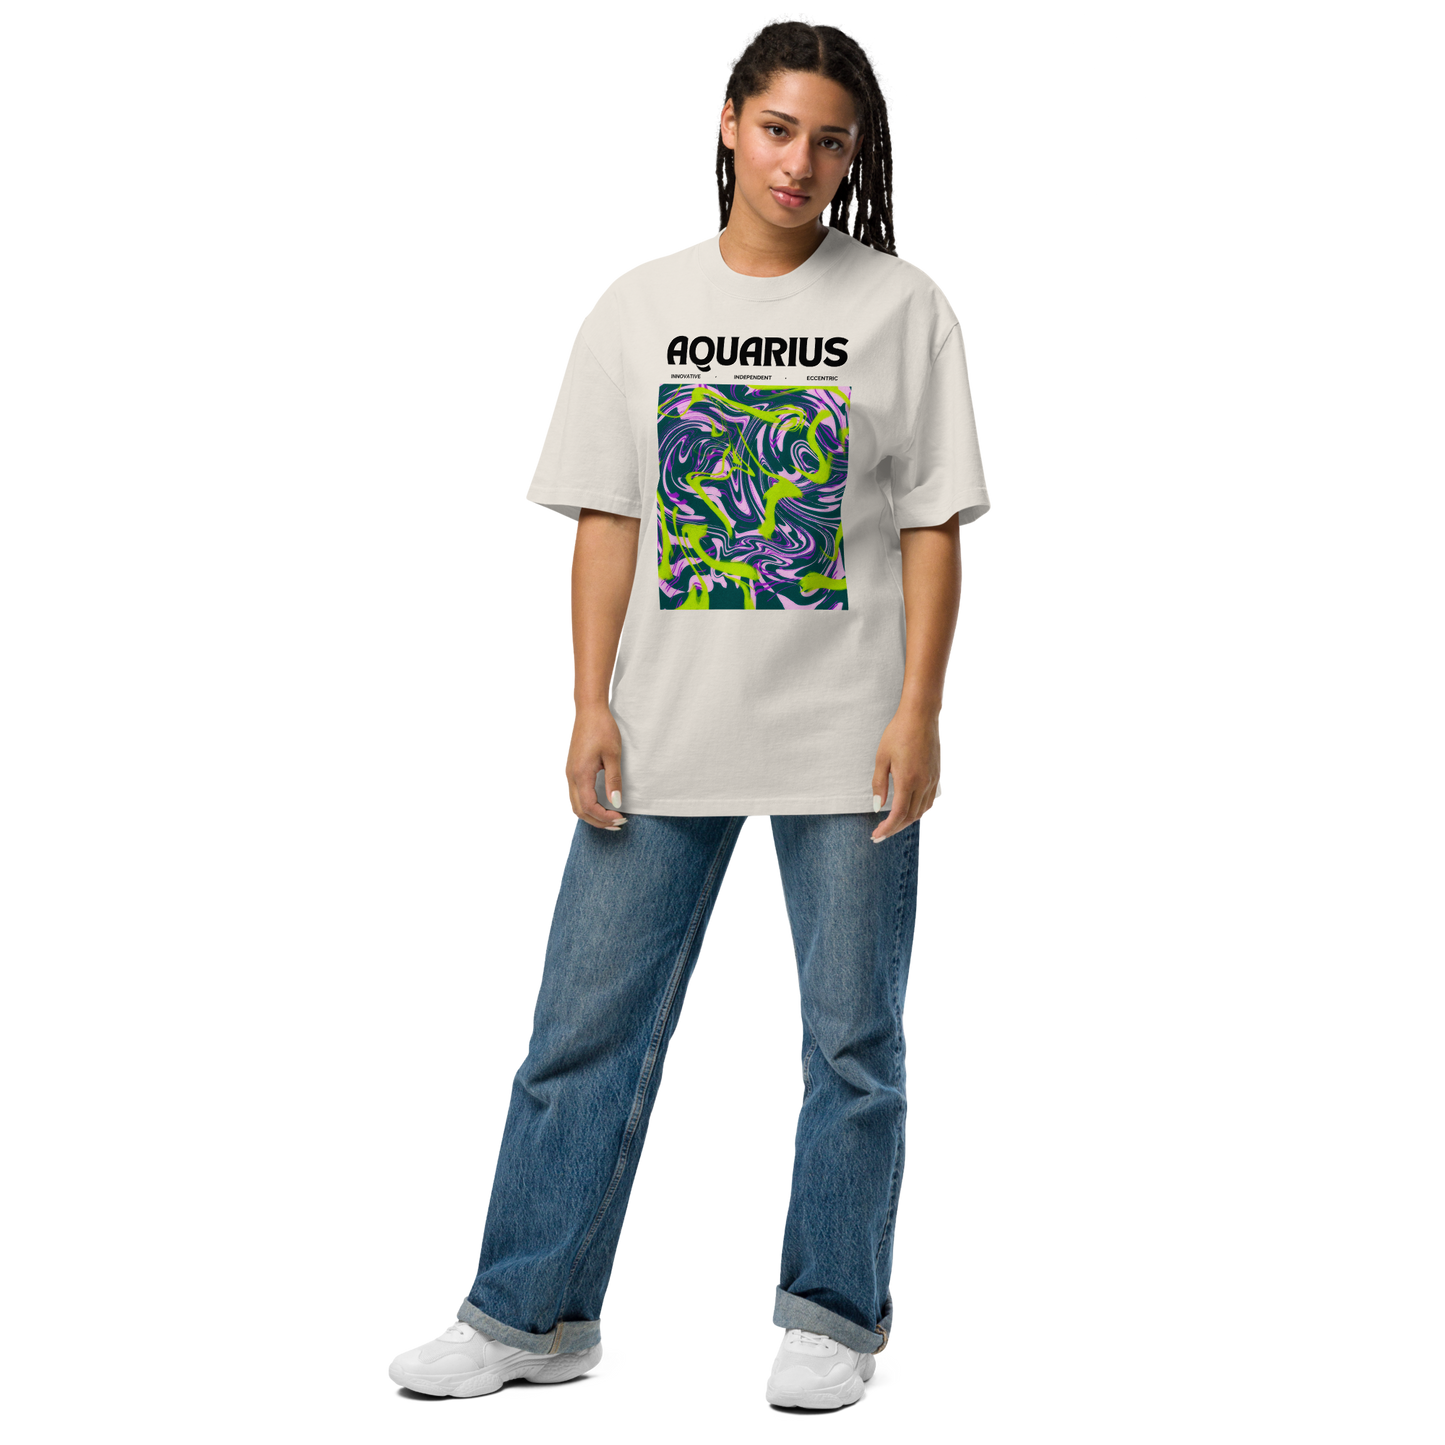 Woman wearing a Faded Bone Aquarius Oversized T-Shirt featuring an Abstract Aquarius Star Sign graphic on the chest - Cool Graphic Zodiac Oversized Tees - Boozy Fox